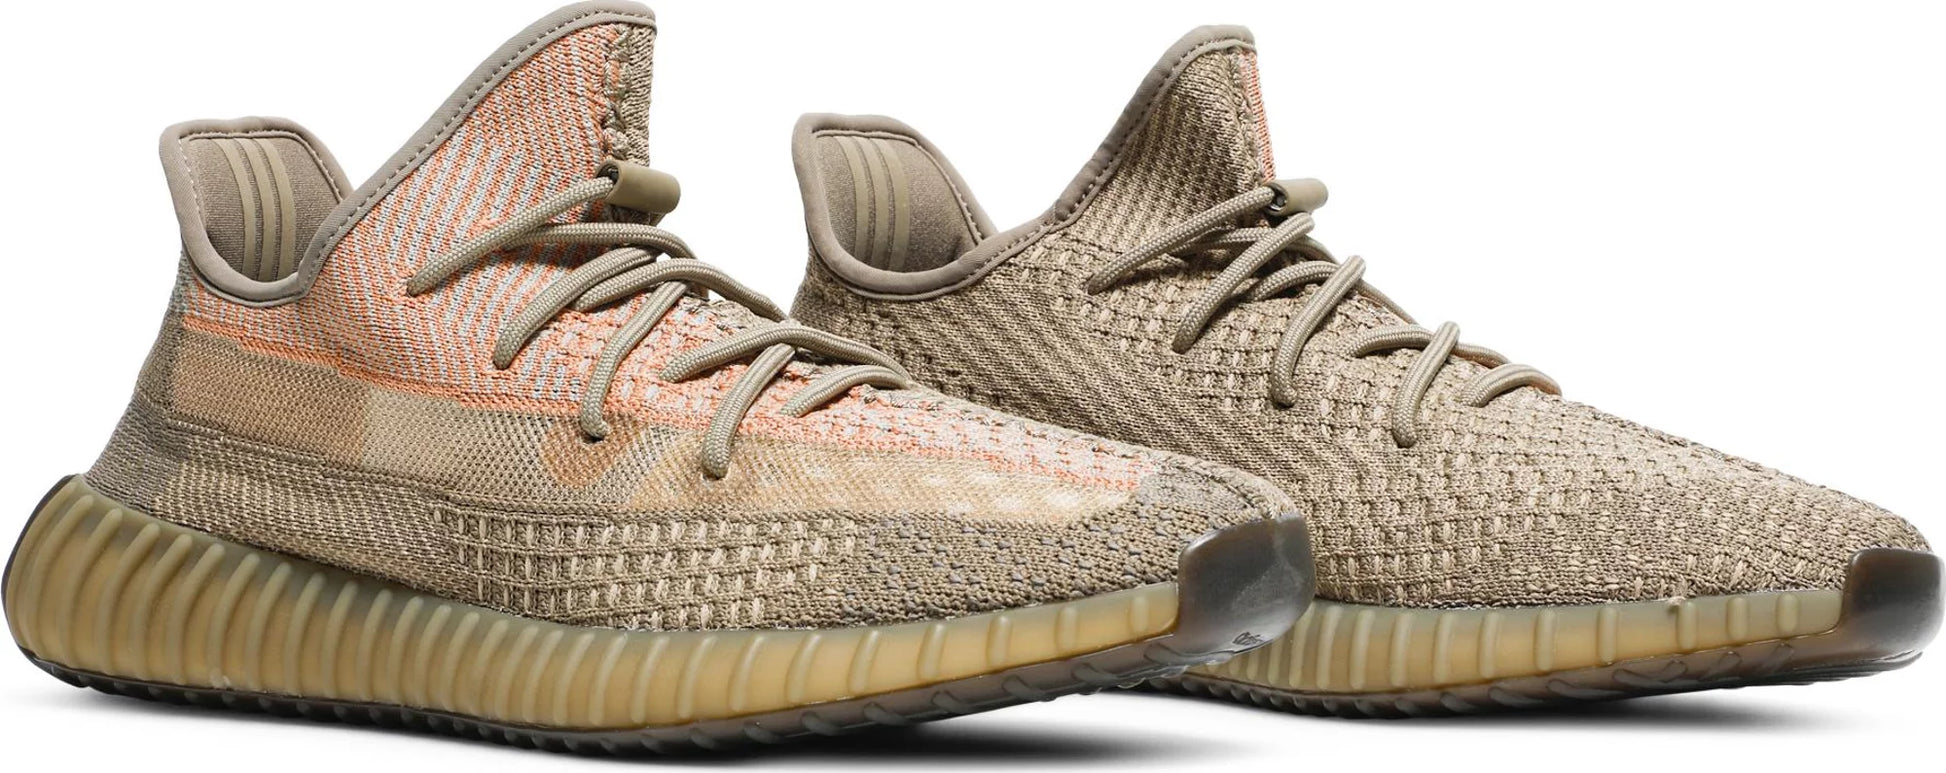 Adidas Yeezy Boost 350 V2 Sand Taupe Yeezy